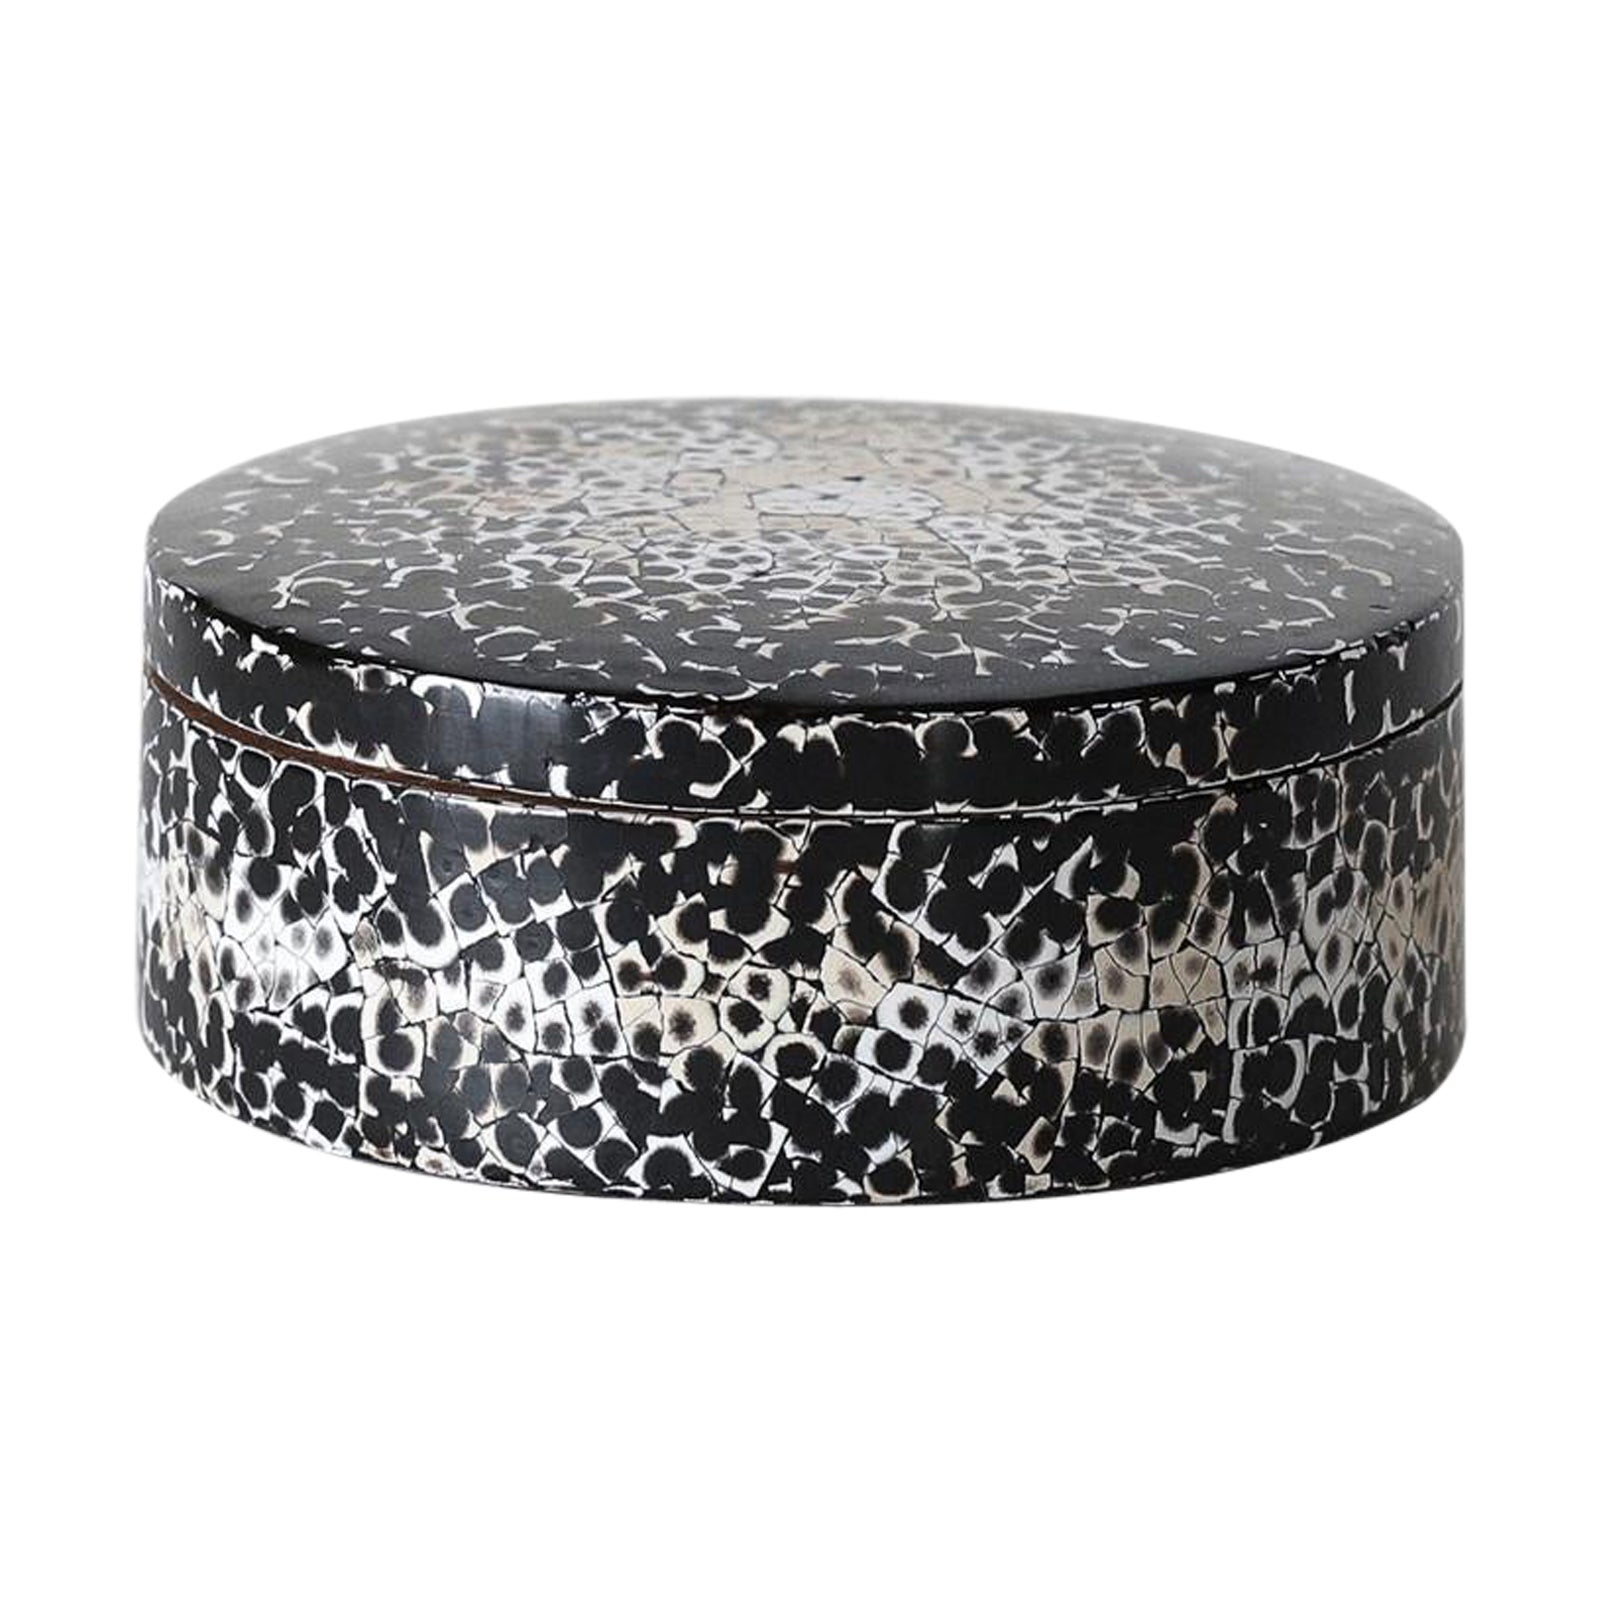 Urushi Lacquer Eggshell Round Brule Box, Medium by Alexander Lamont For Sale